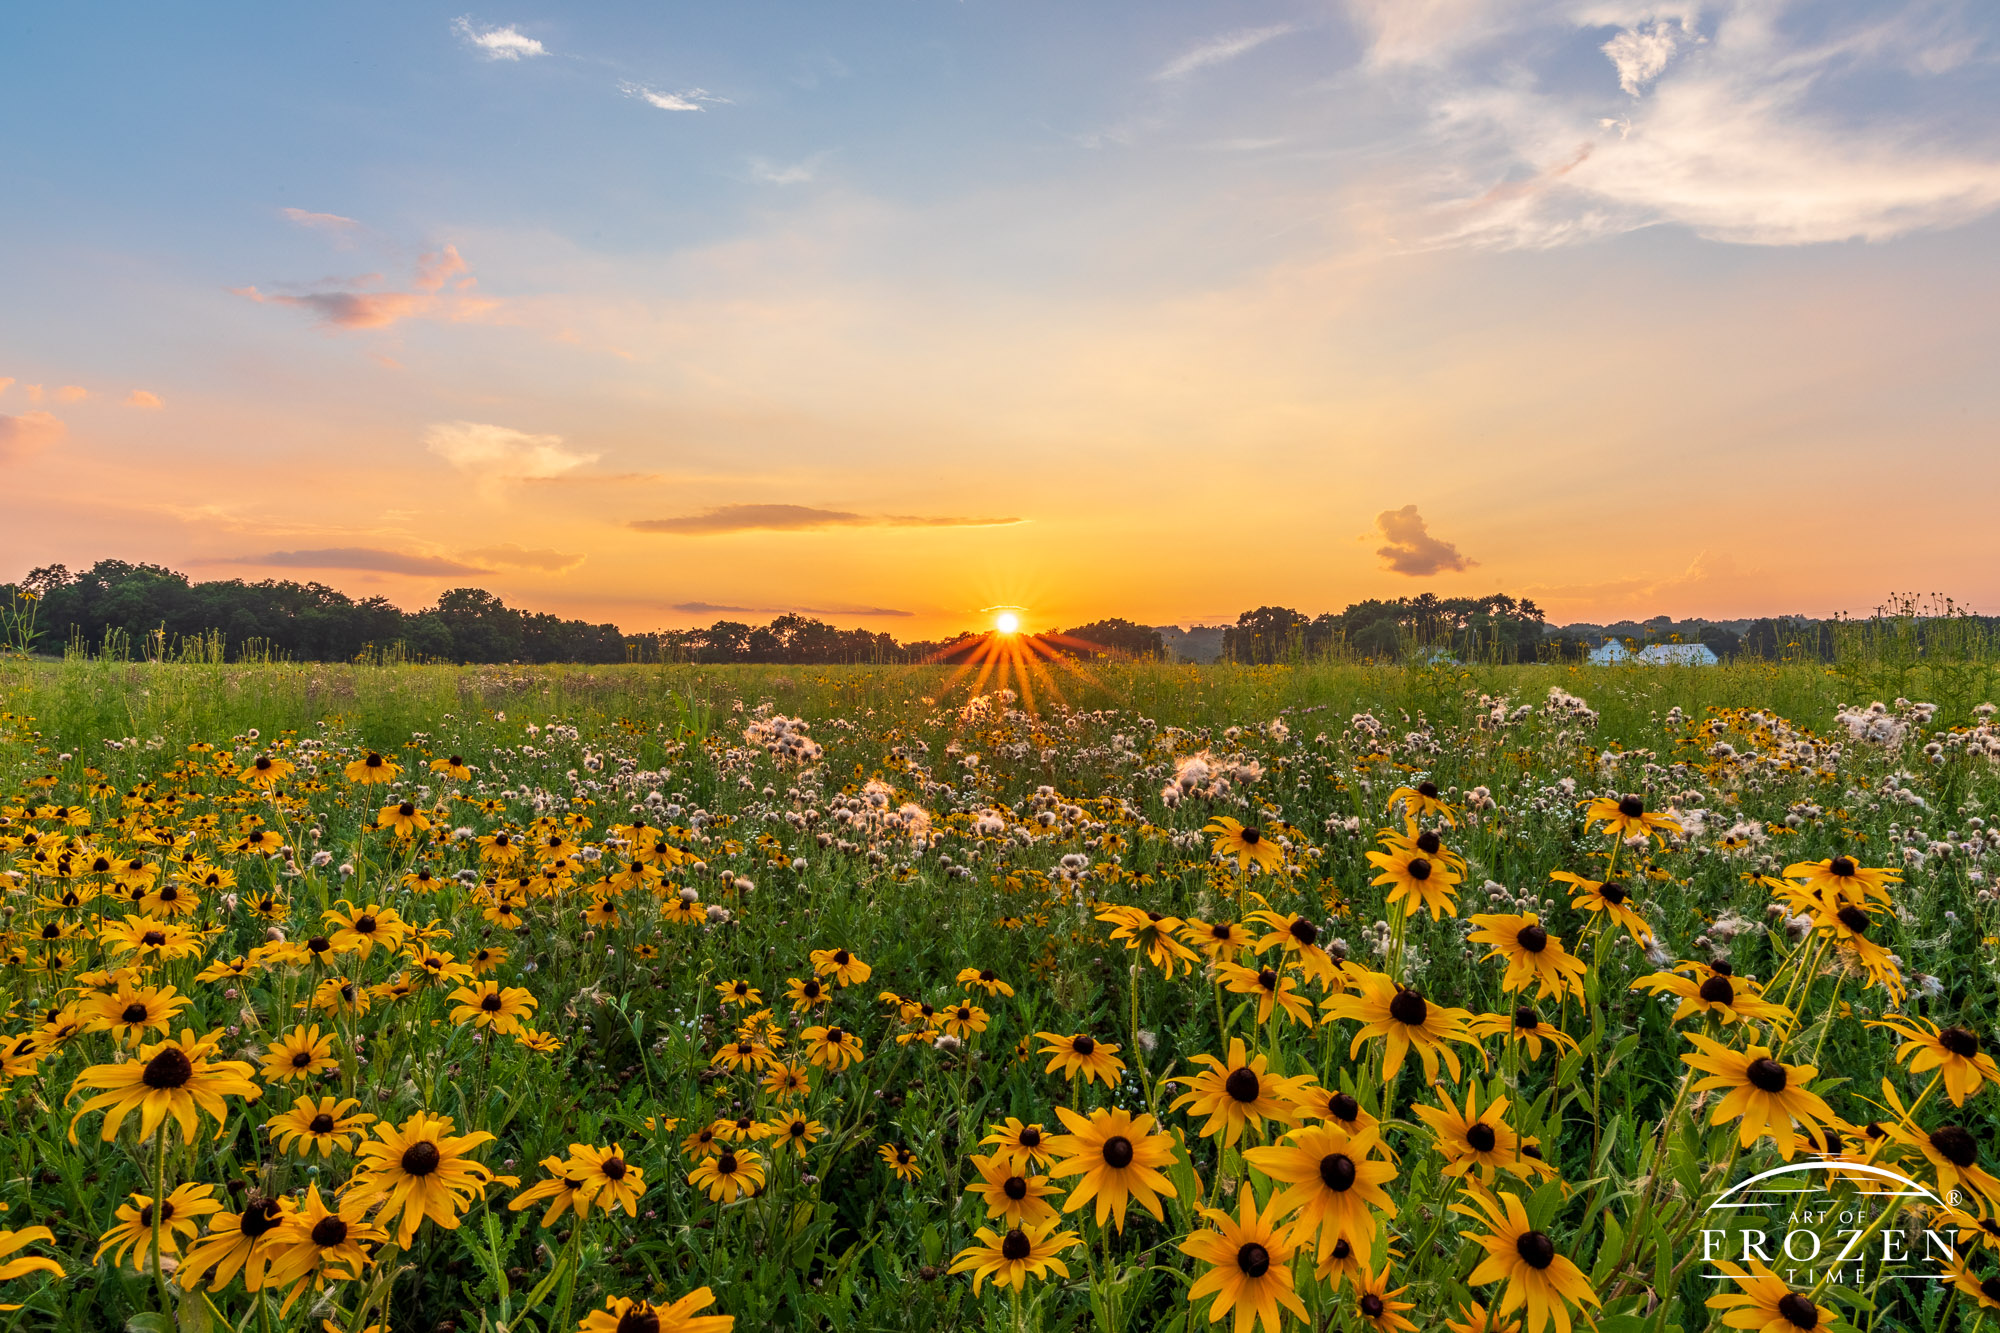 A prairie of Black-eyed Susans at sunset where the flower petals mimic the rays from the sun.